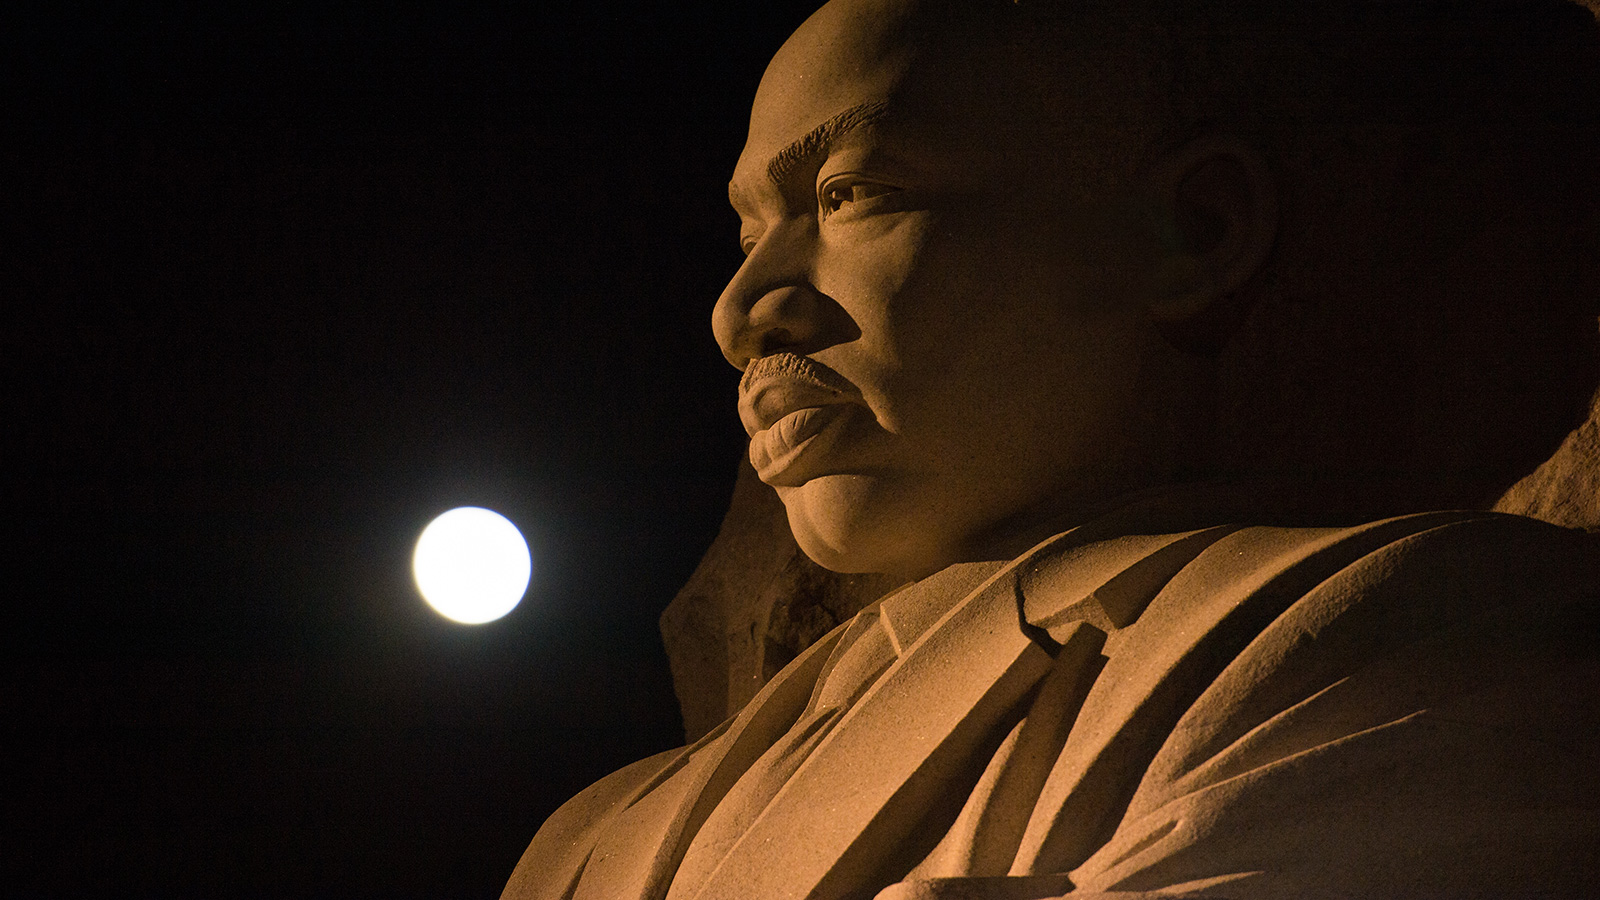 Full Moon over giant statue of the Martin Luther King Jr.